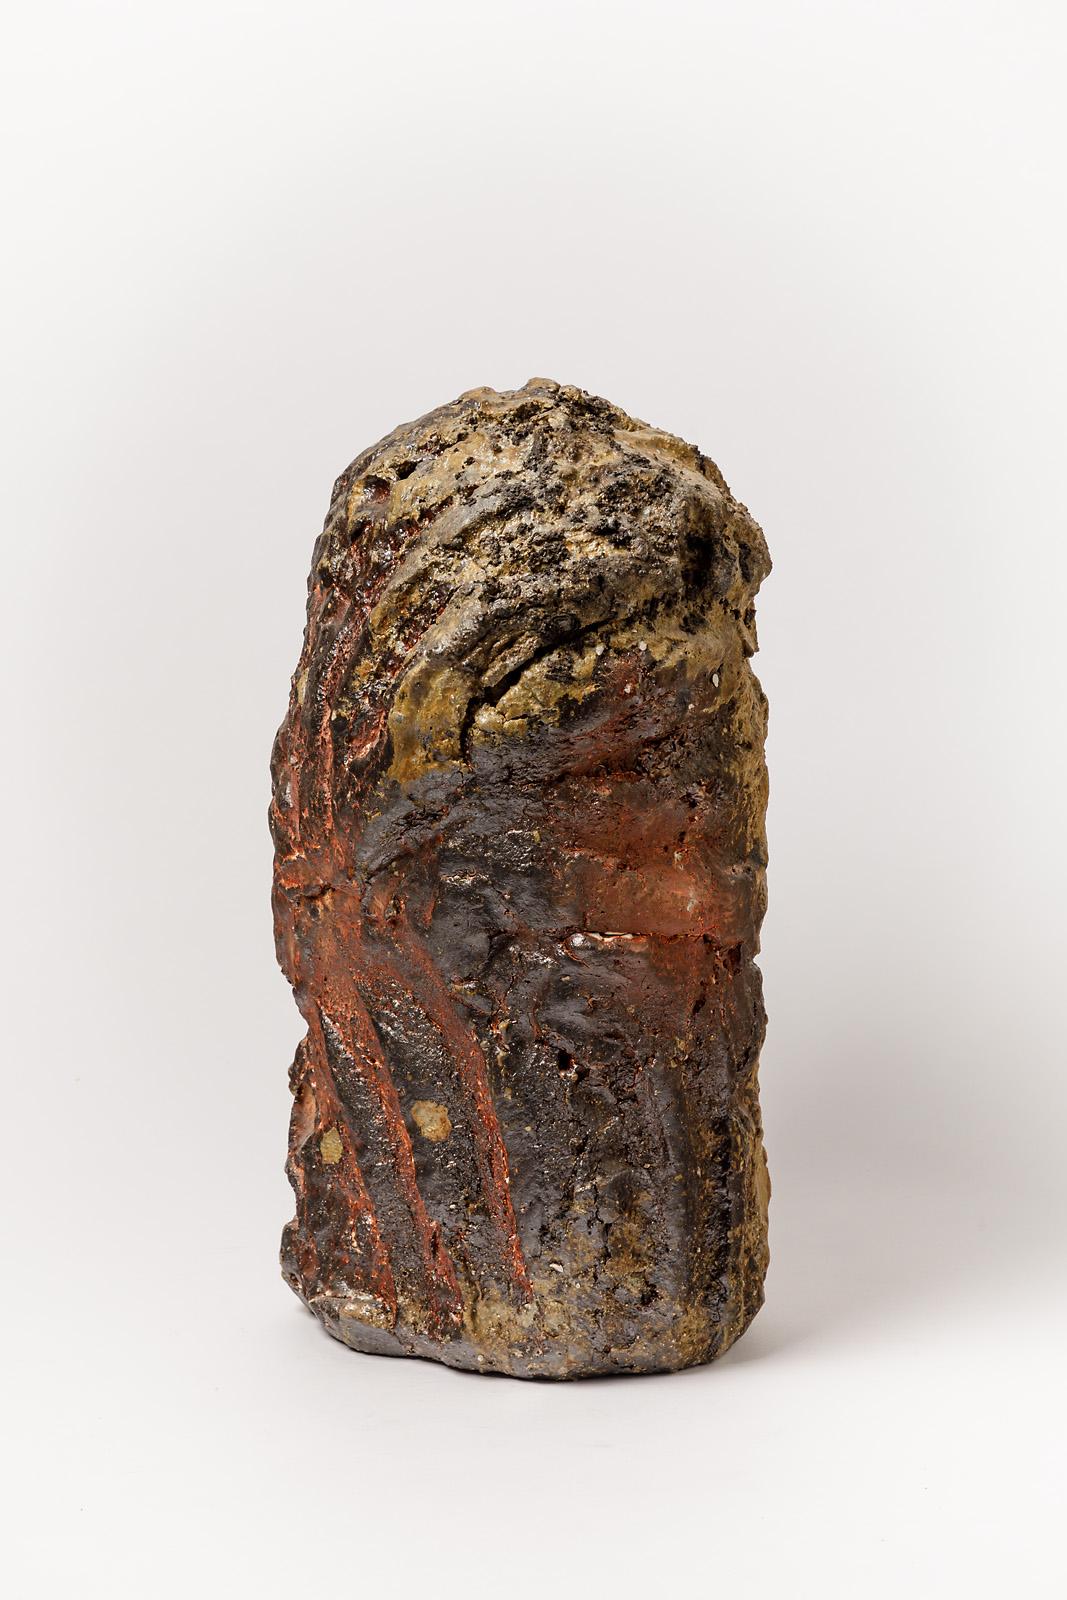 Modern Brutalist Brown Stoneware Ceramic Sculpture Abstract Form by Hervé Rousseau For Sale